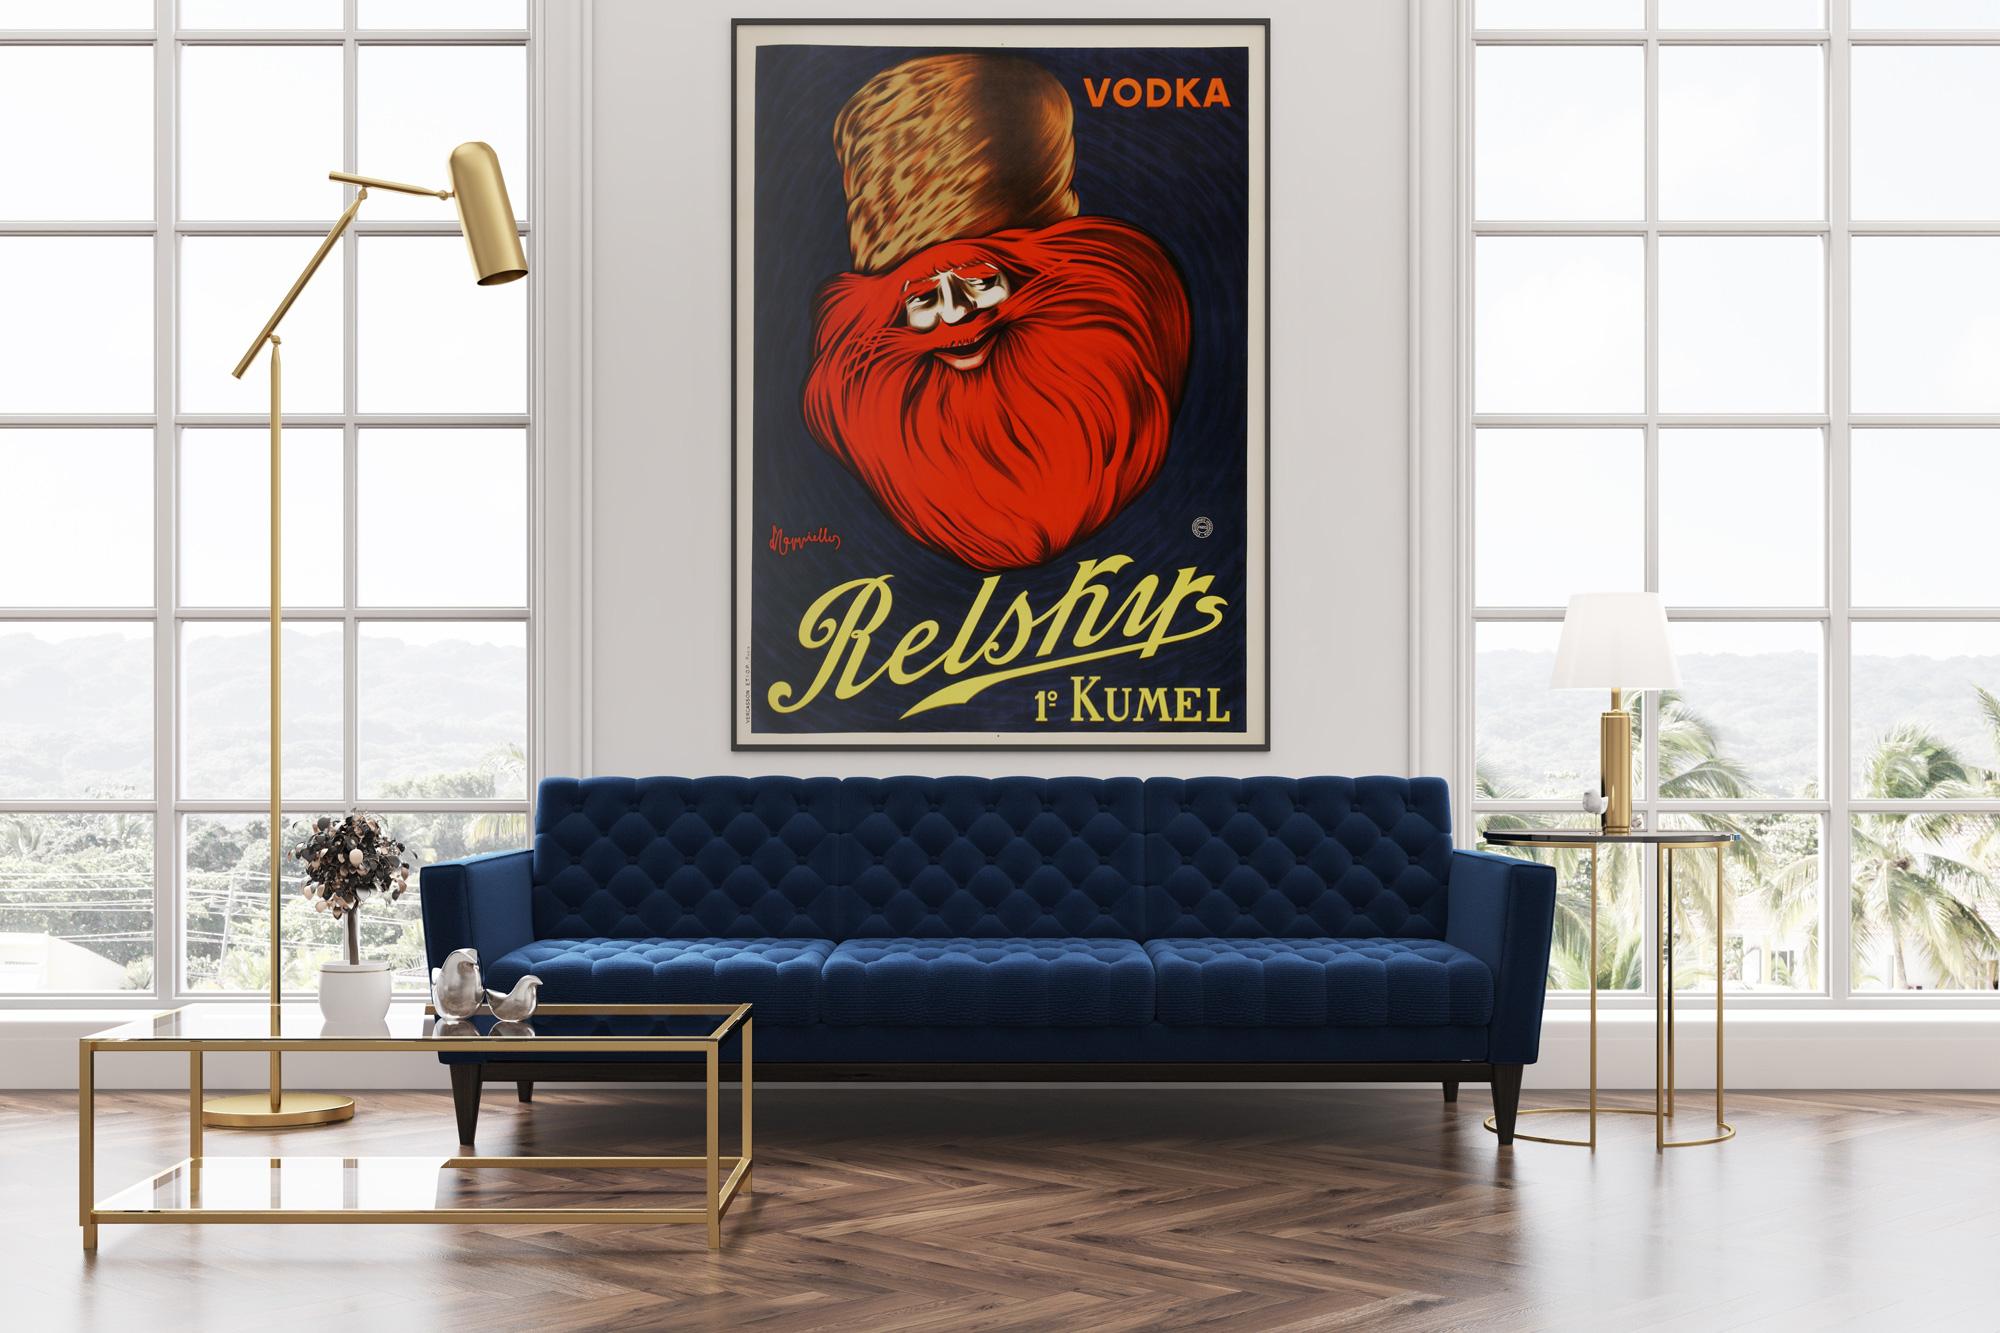 Stunning original French vintage advertisement poster for Relsky Vodka, circa 1925. In this large size this original Resky Vodka poster by the infamous artist Leonetto Cappiello, often called 'the father of modern advertising' because of his